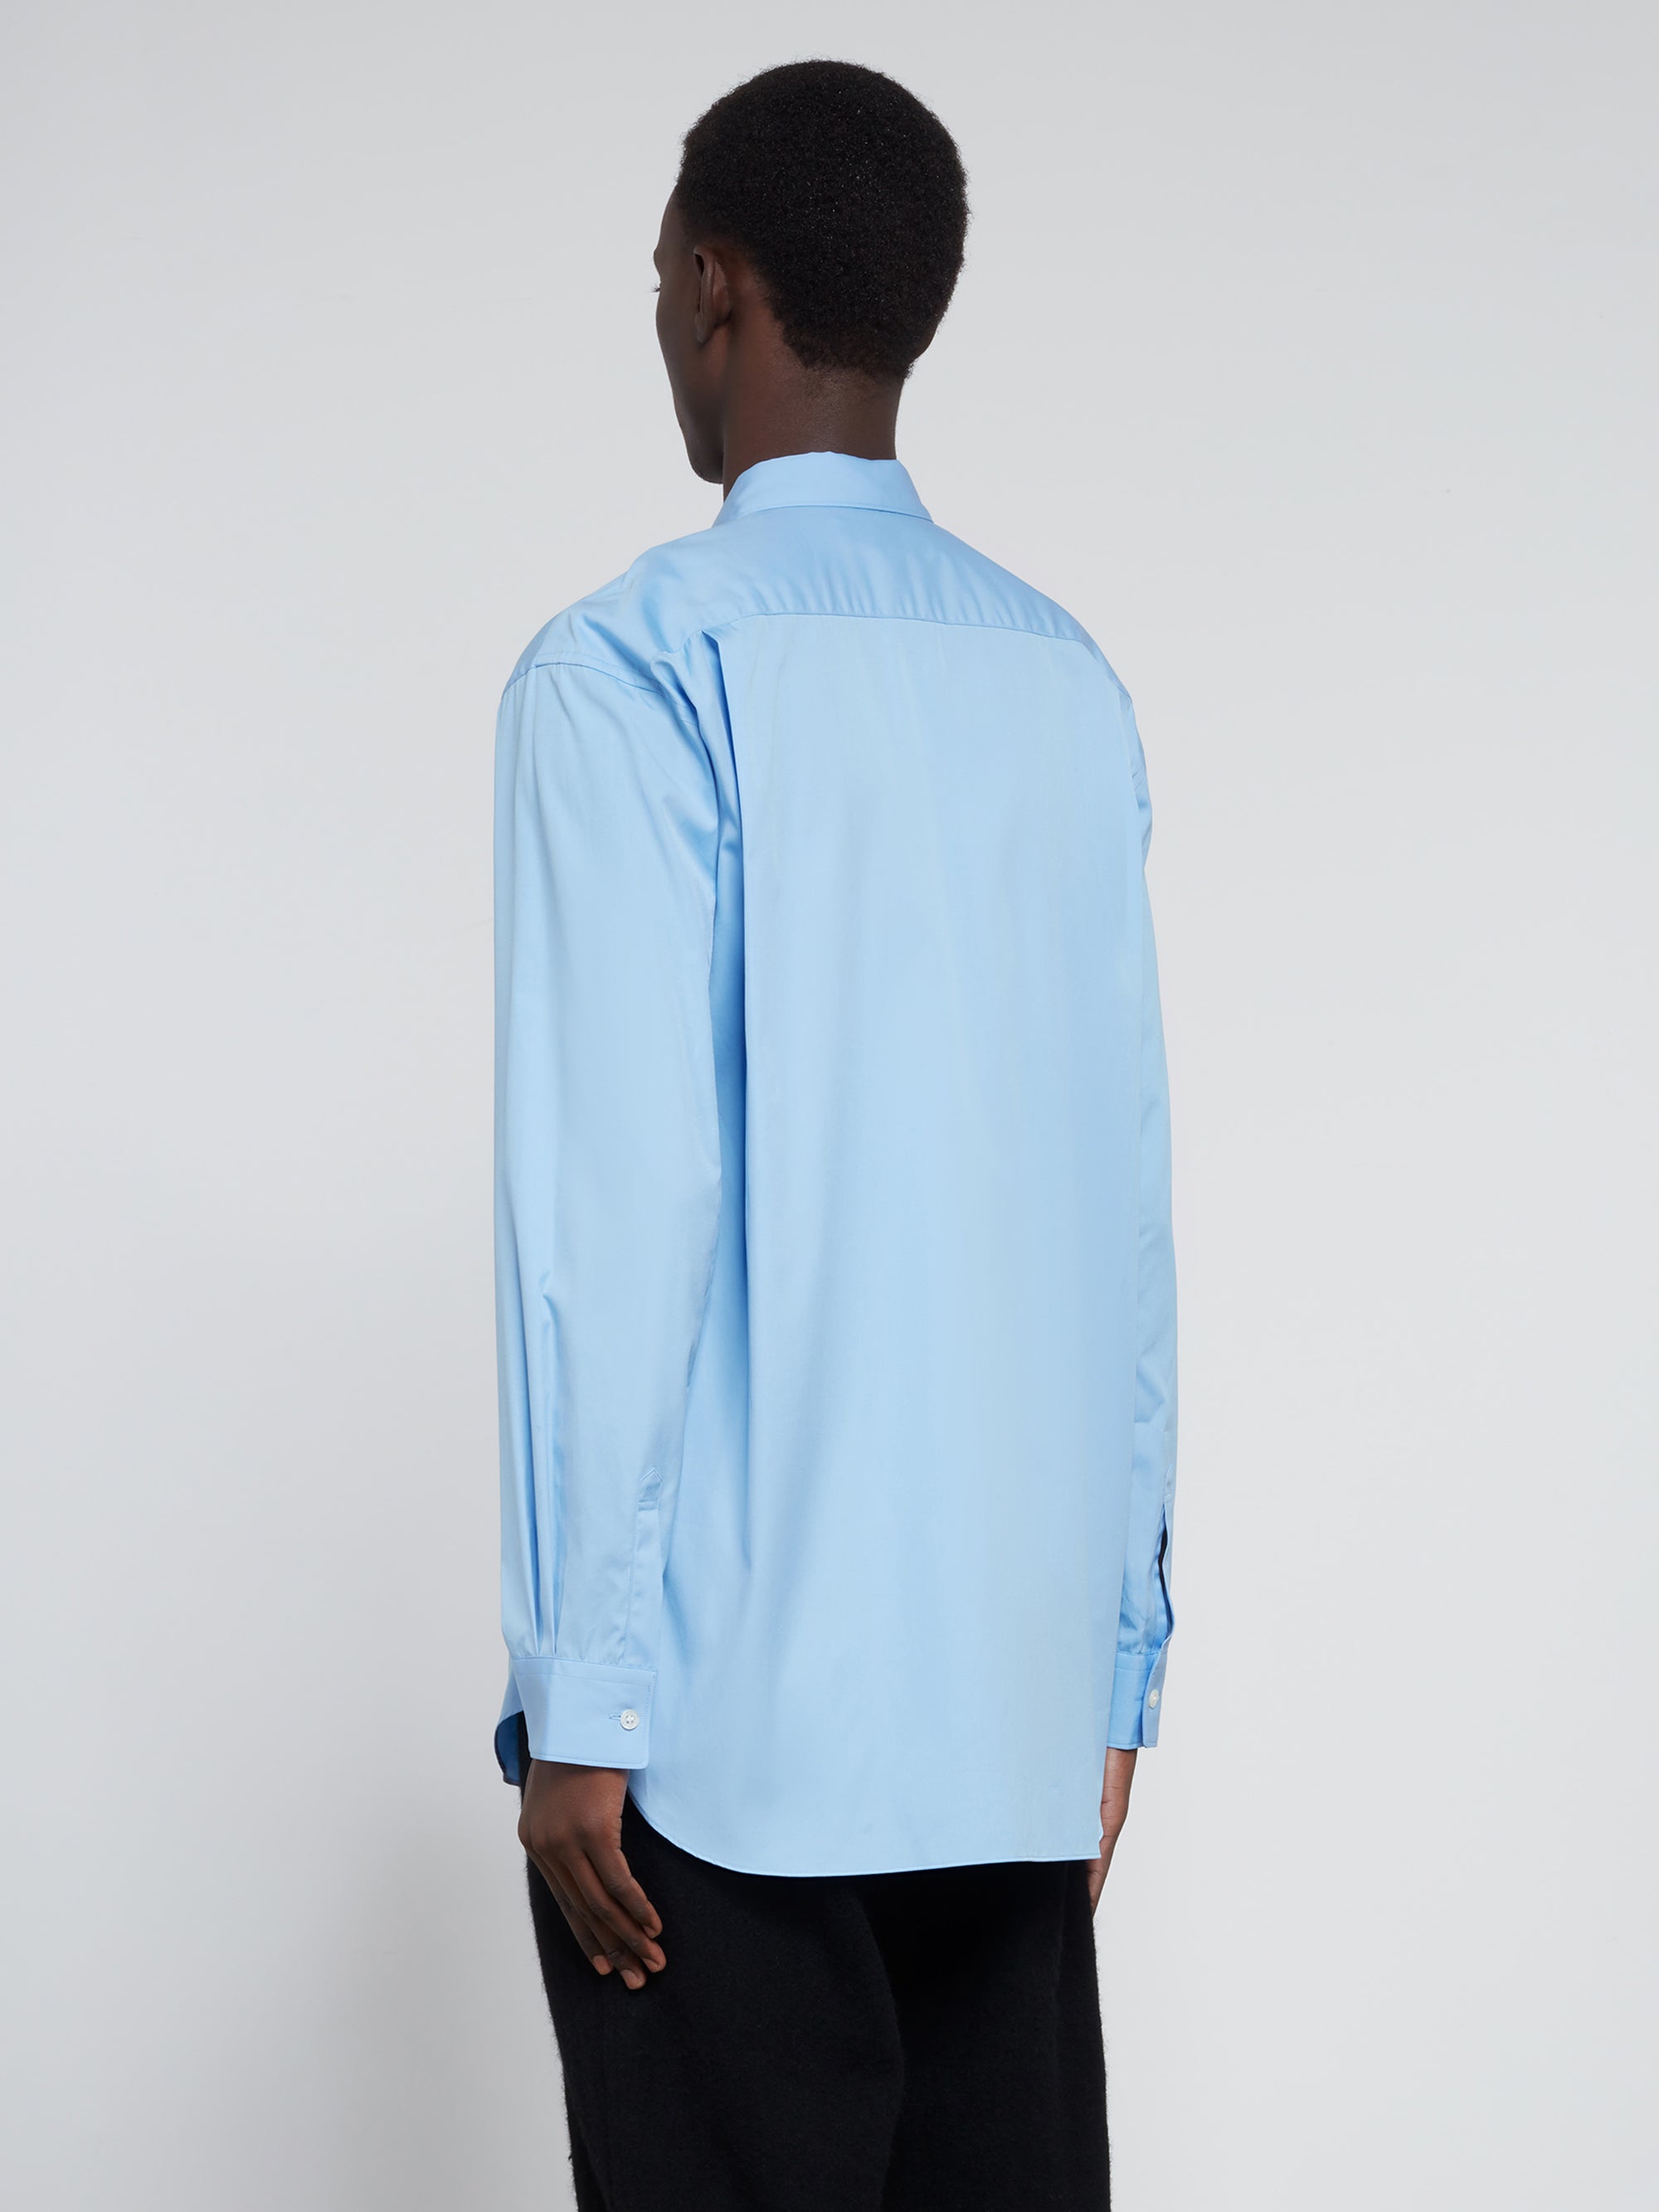 CDG Shirt Forever - Classic Fit Woven Cotton Shirt - (Baby Blue) view 4